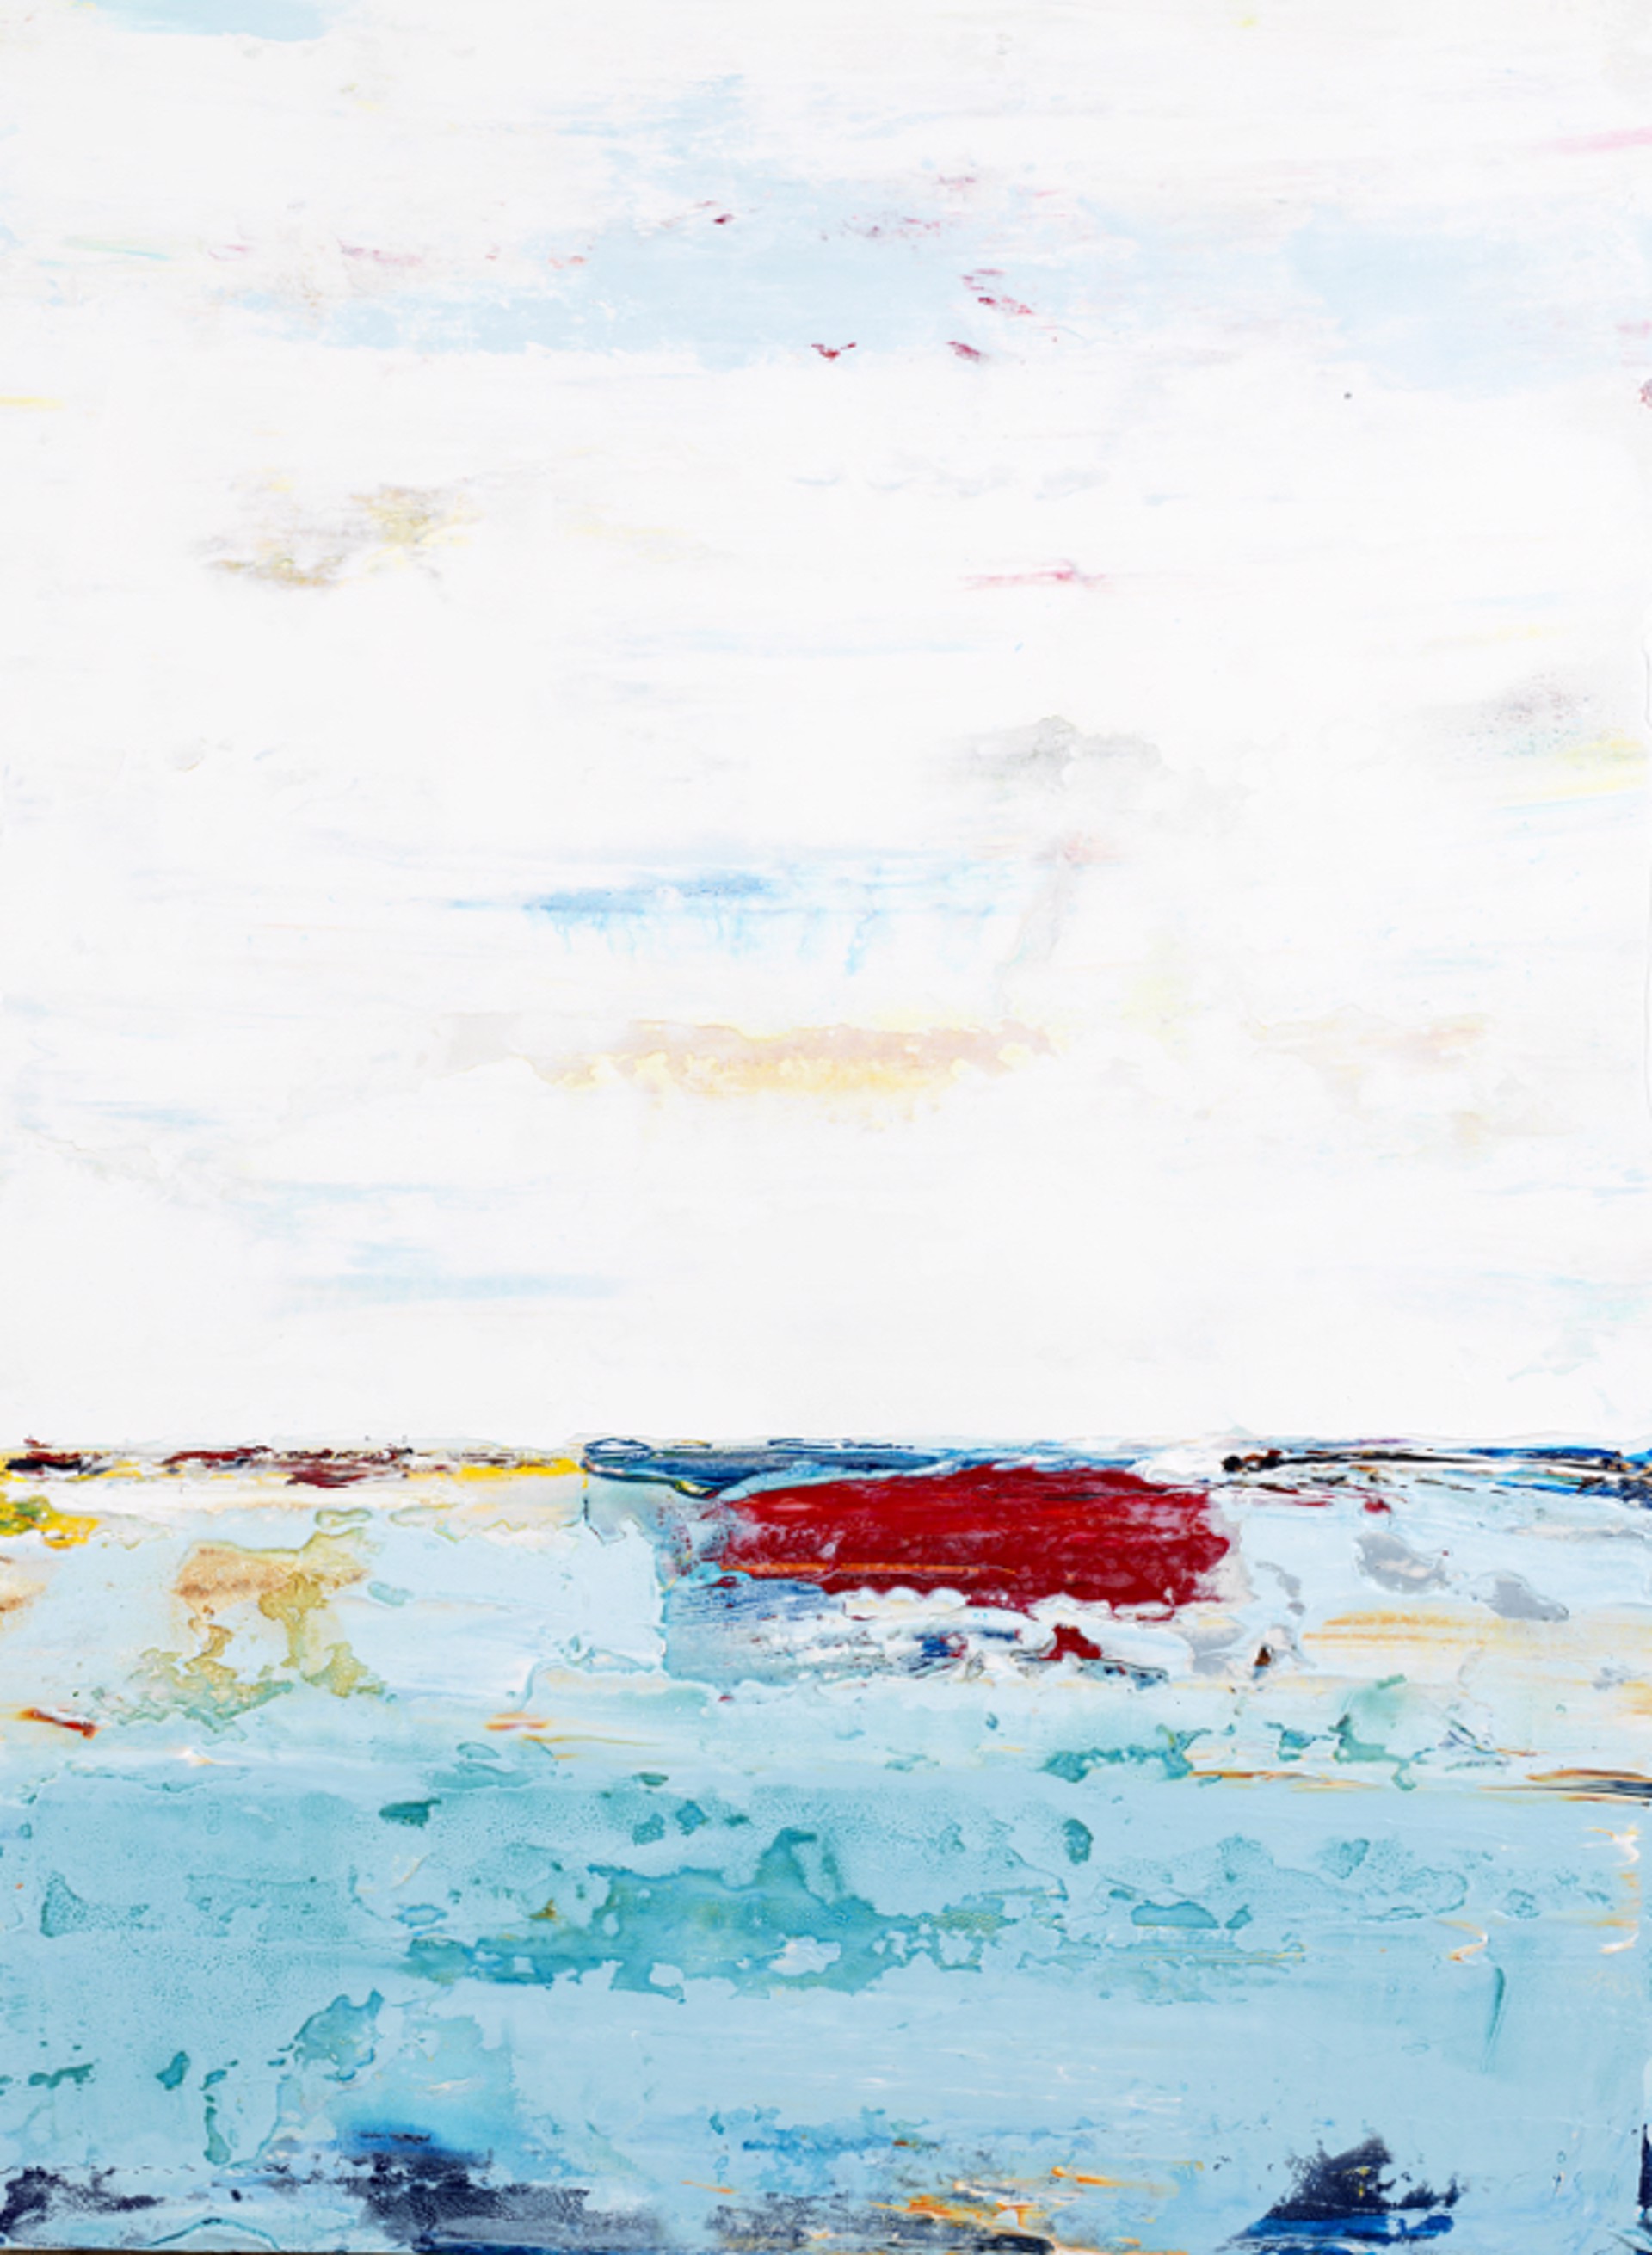 Marino #57 is a beautiful 40"H x 30"W abstract seascape painting by South Florida artist and painter John Schuyler, featuring a dividing line where sky meets sea. 